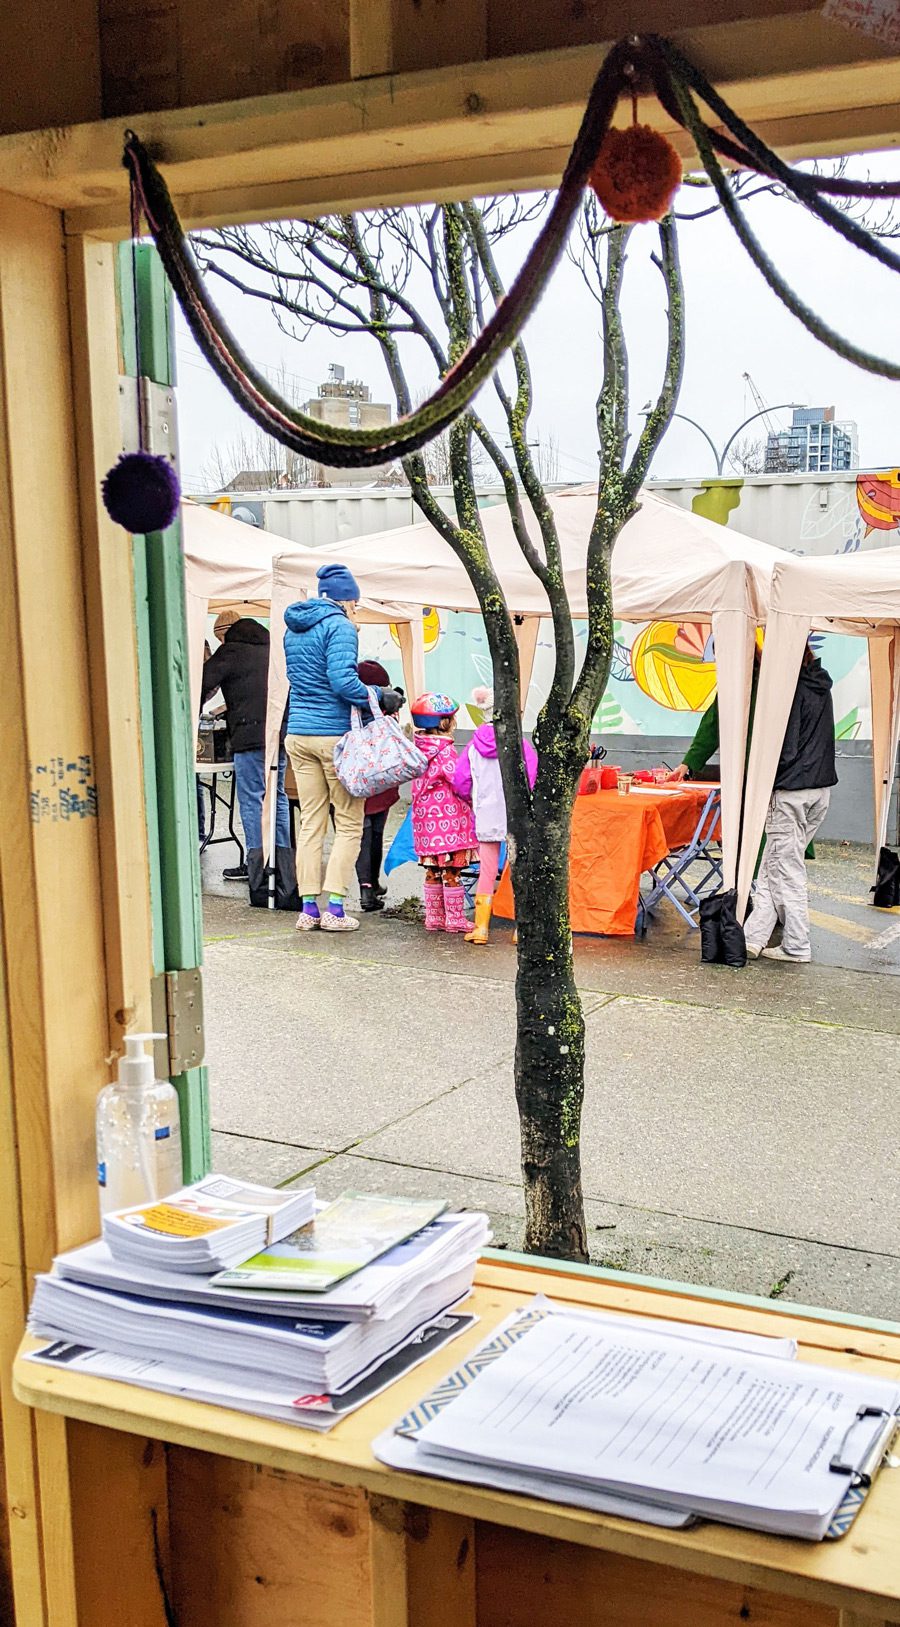 An adult and three kids stop by a market booth on a cloudy day.